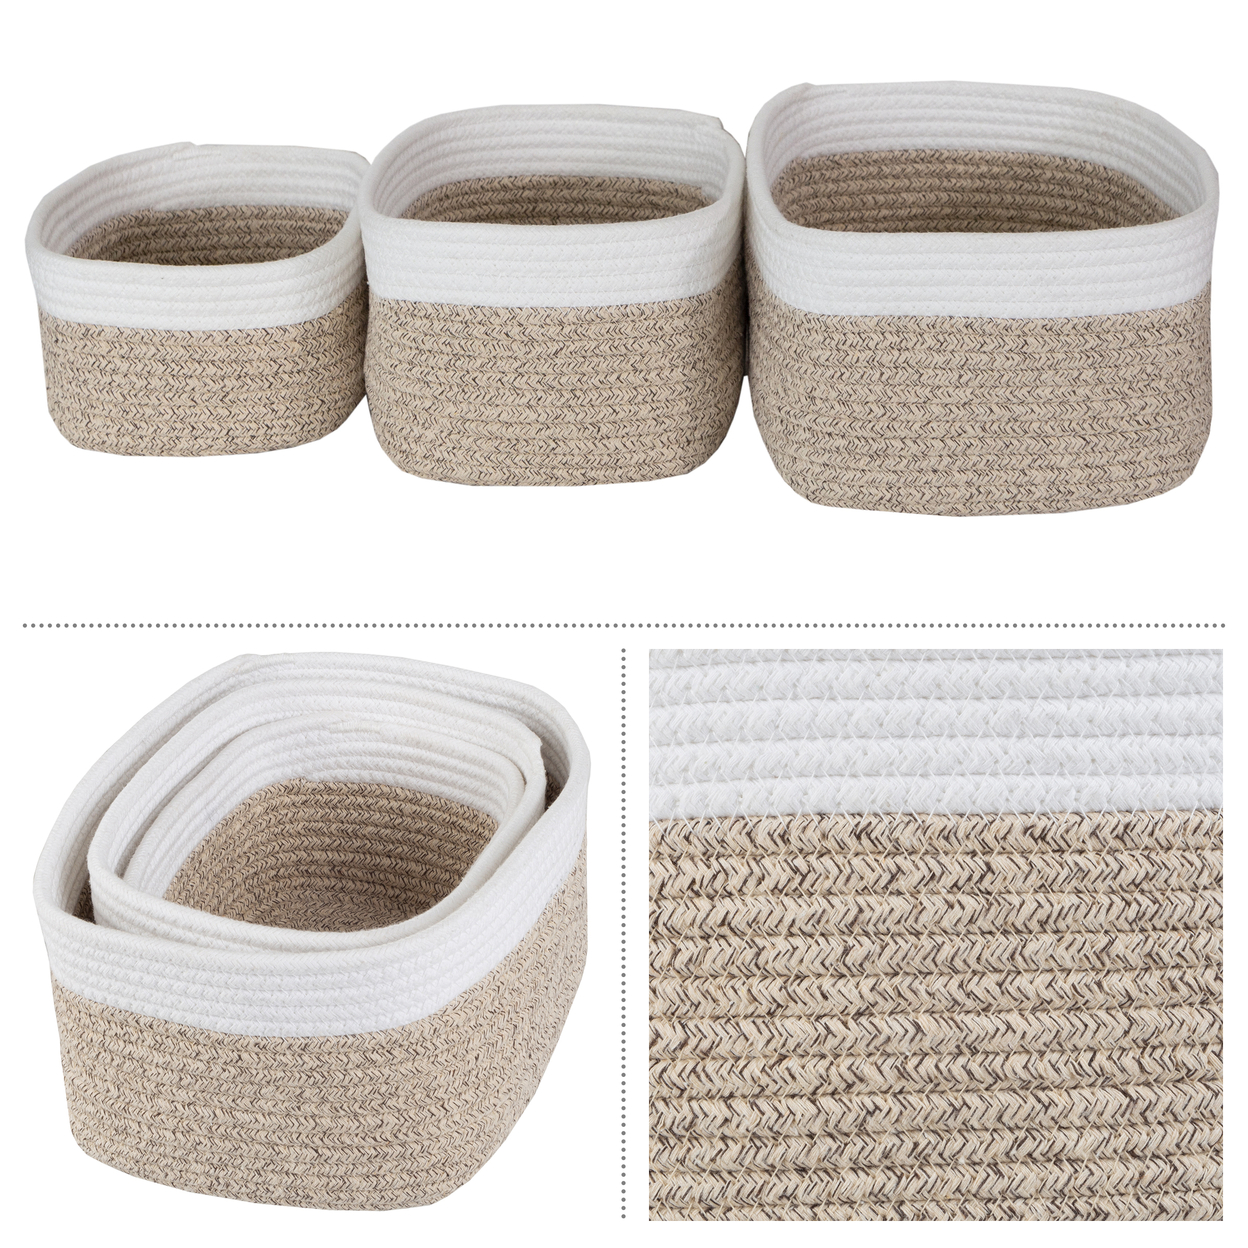 3pc Storage Basket Set Small Medium Large Rope Baskets For All Rooms, Natural